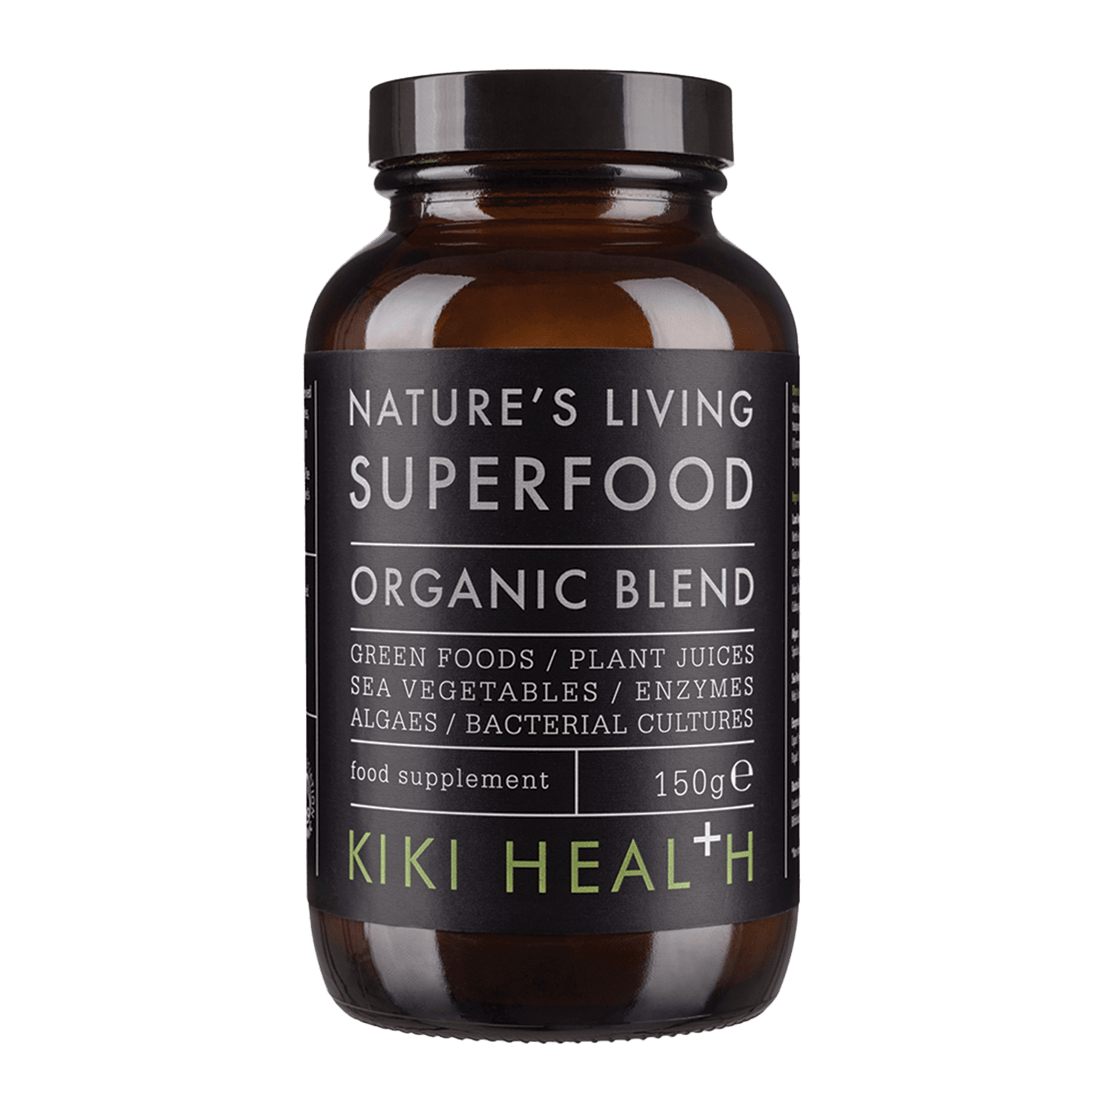 Nature’s Living Superfood